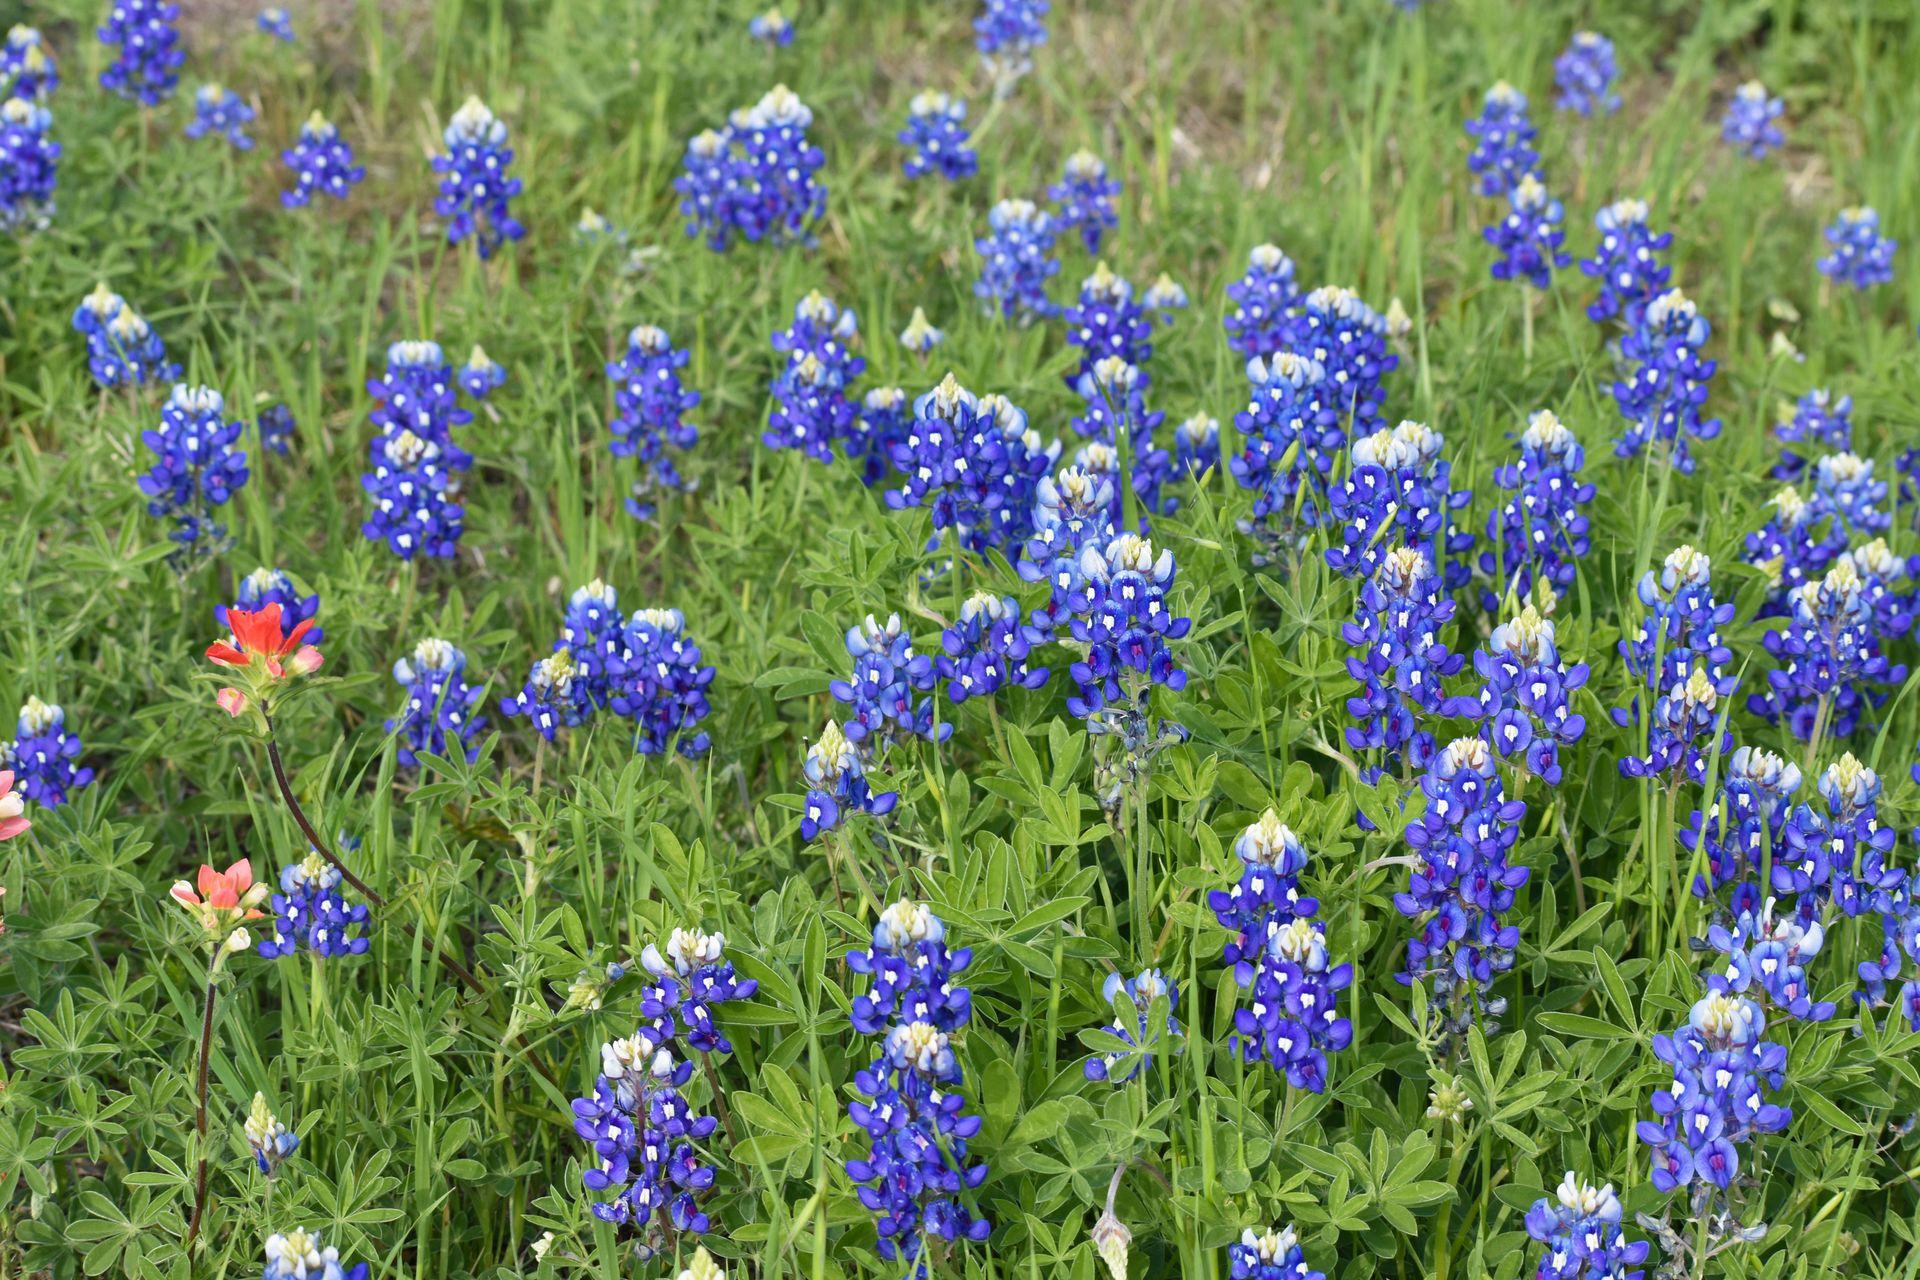 A close up look at bluebonnets